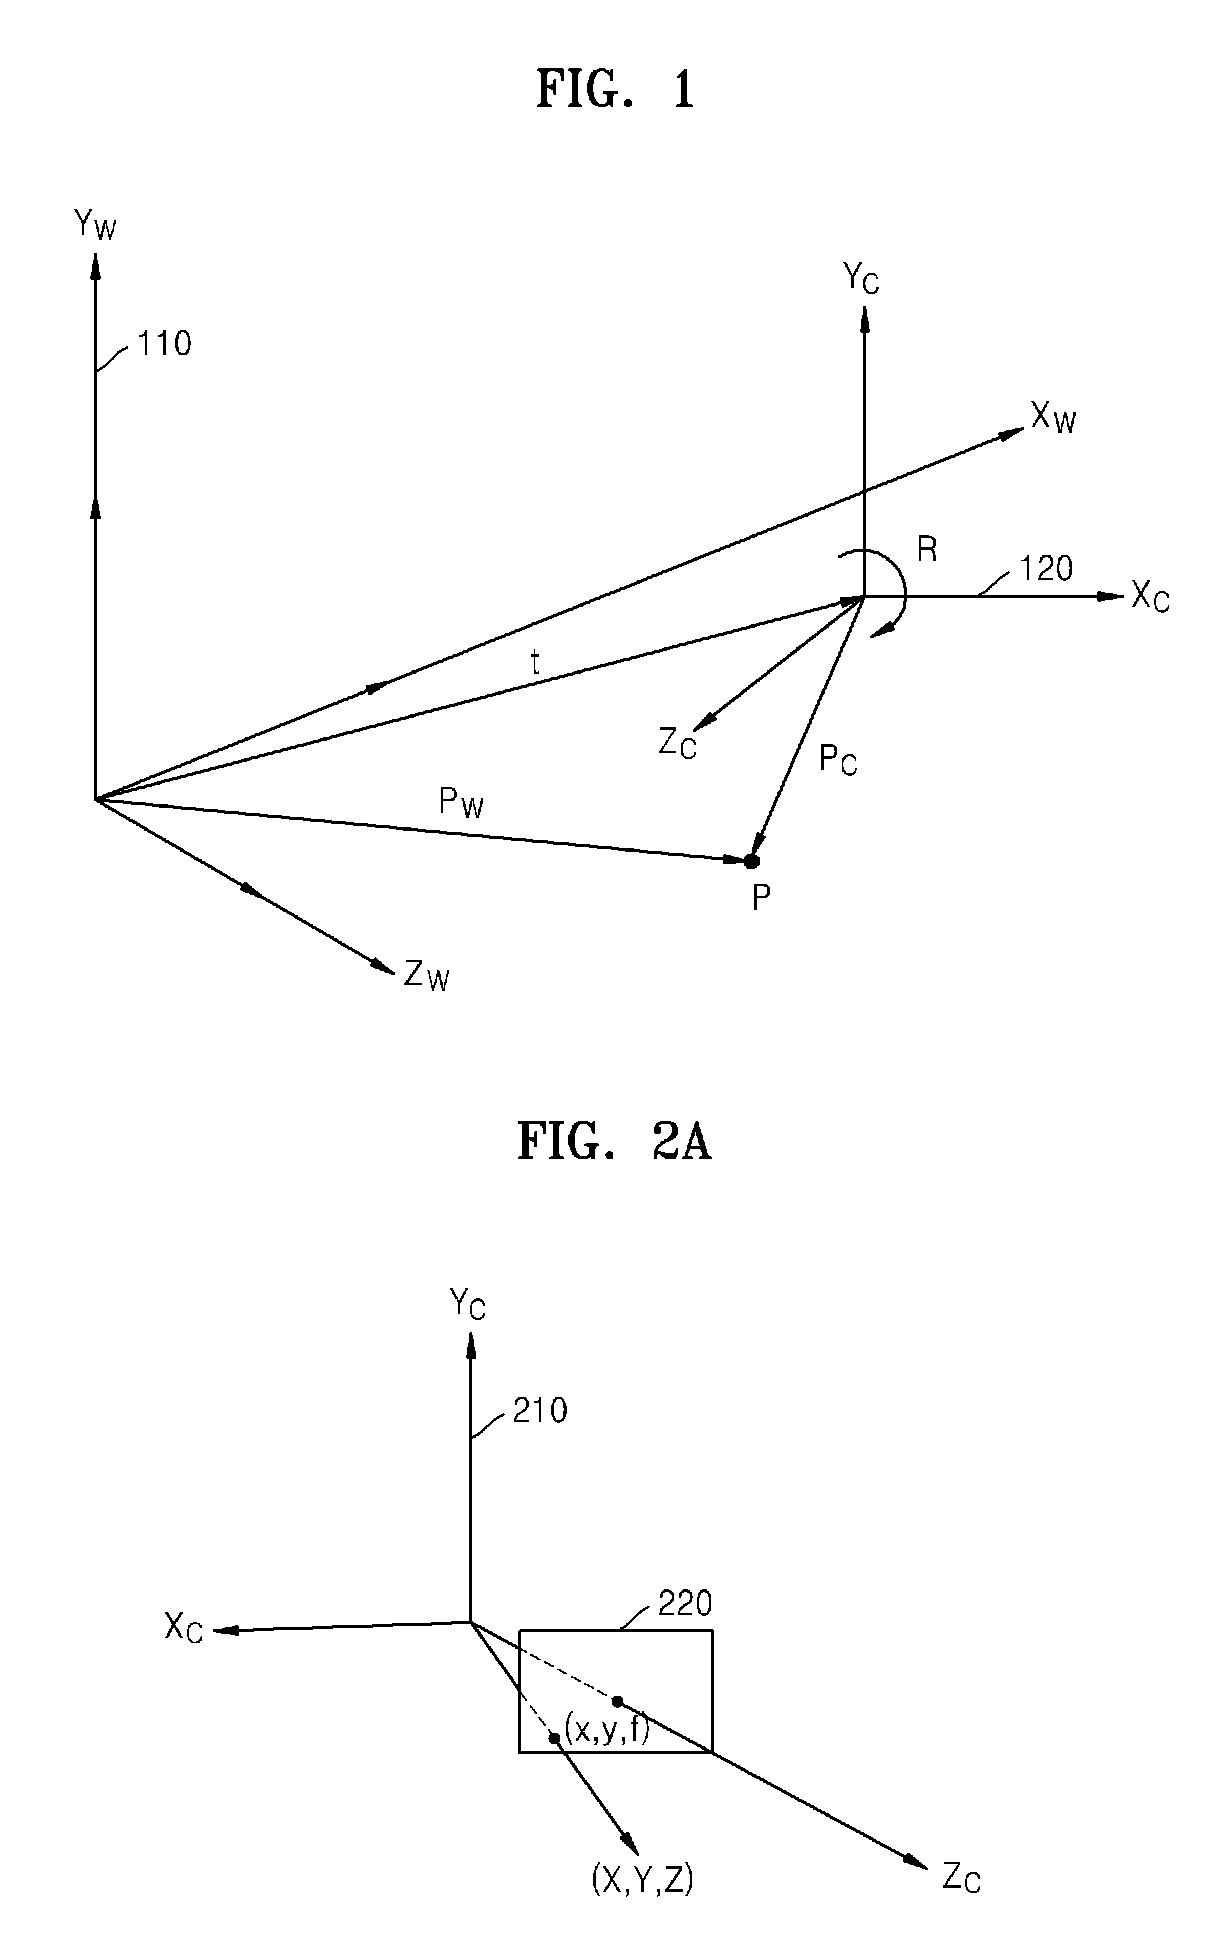 Method and apparatus for receiving multiview camera parameters for stereoscopic image, and method and apparatus for transmitting multiview camera parameters for stereoscopic image